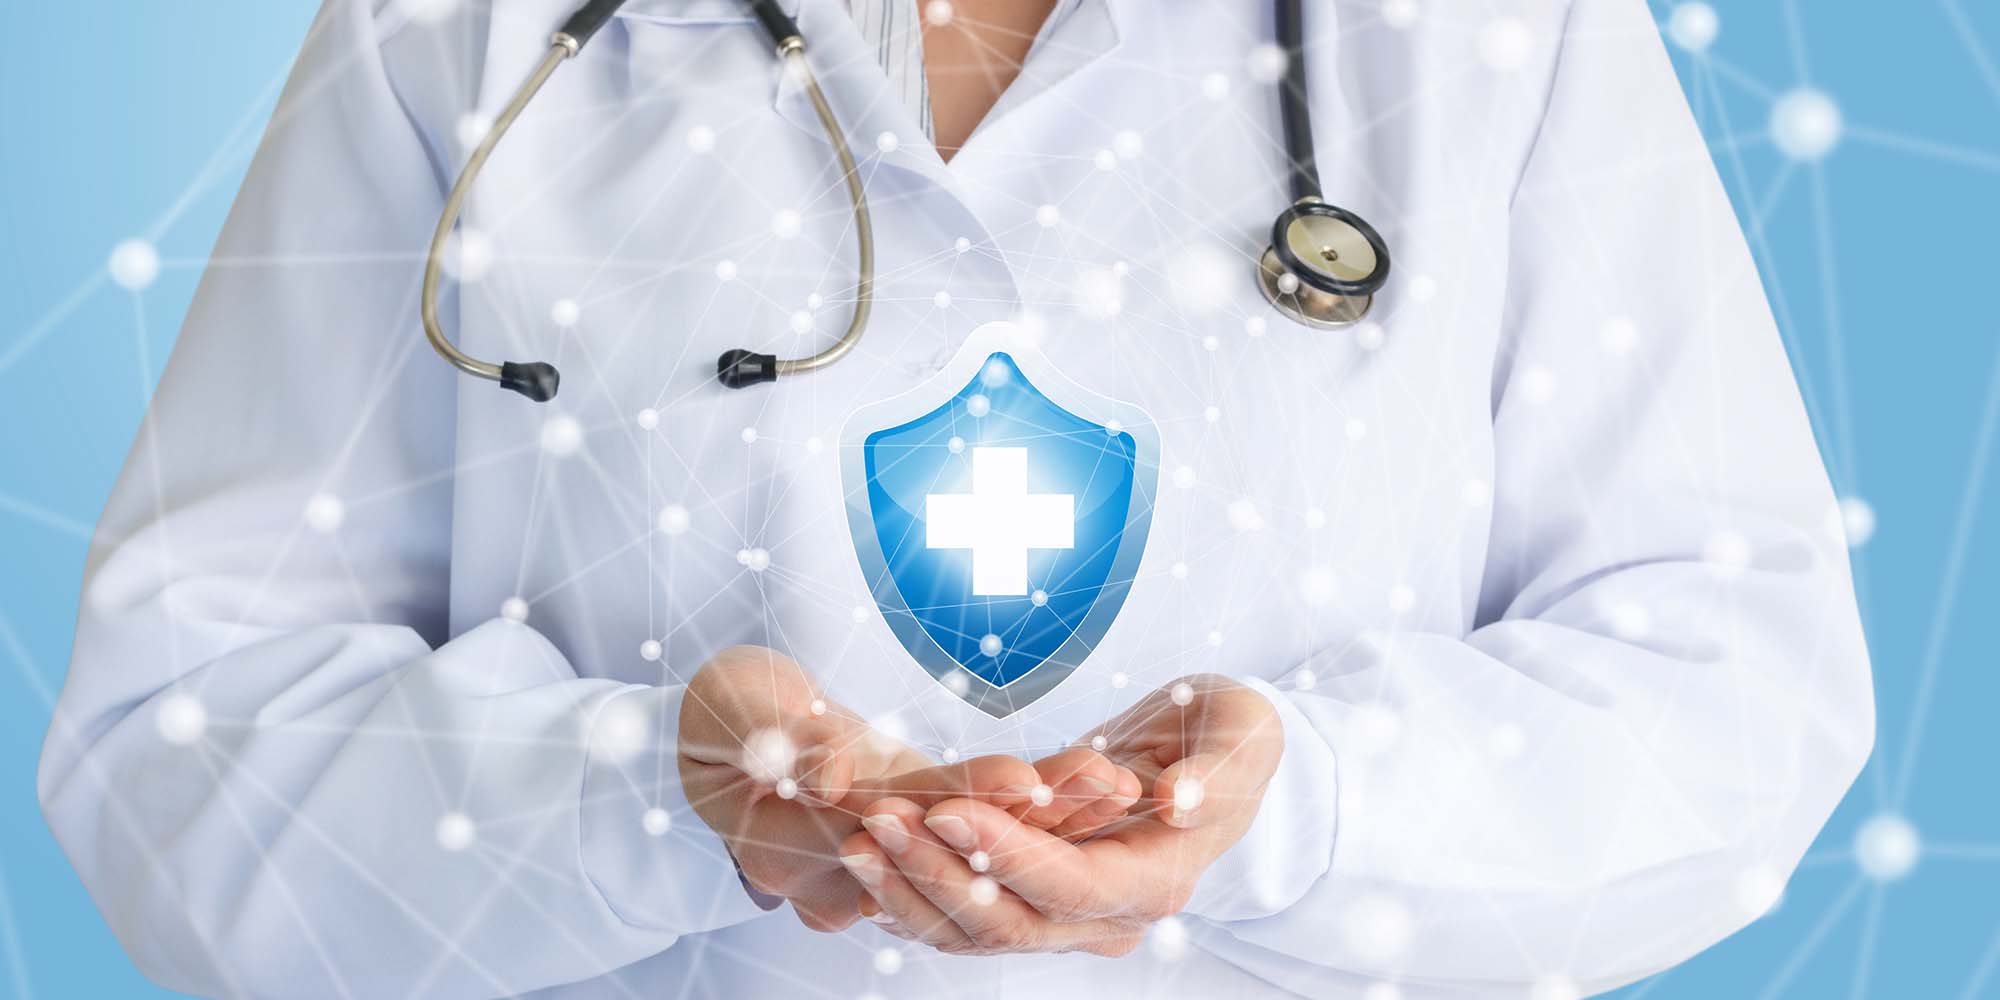 Provision takes healthcare safety and security very seriously